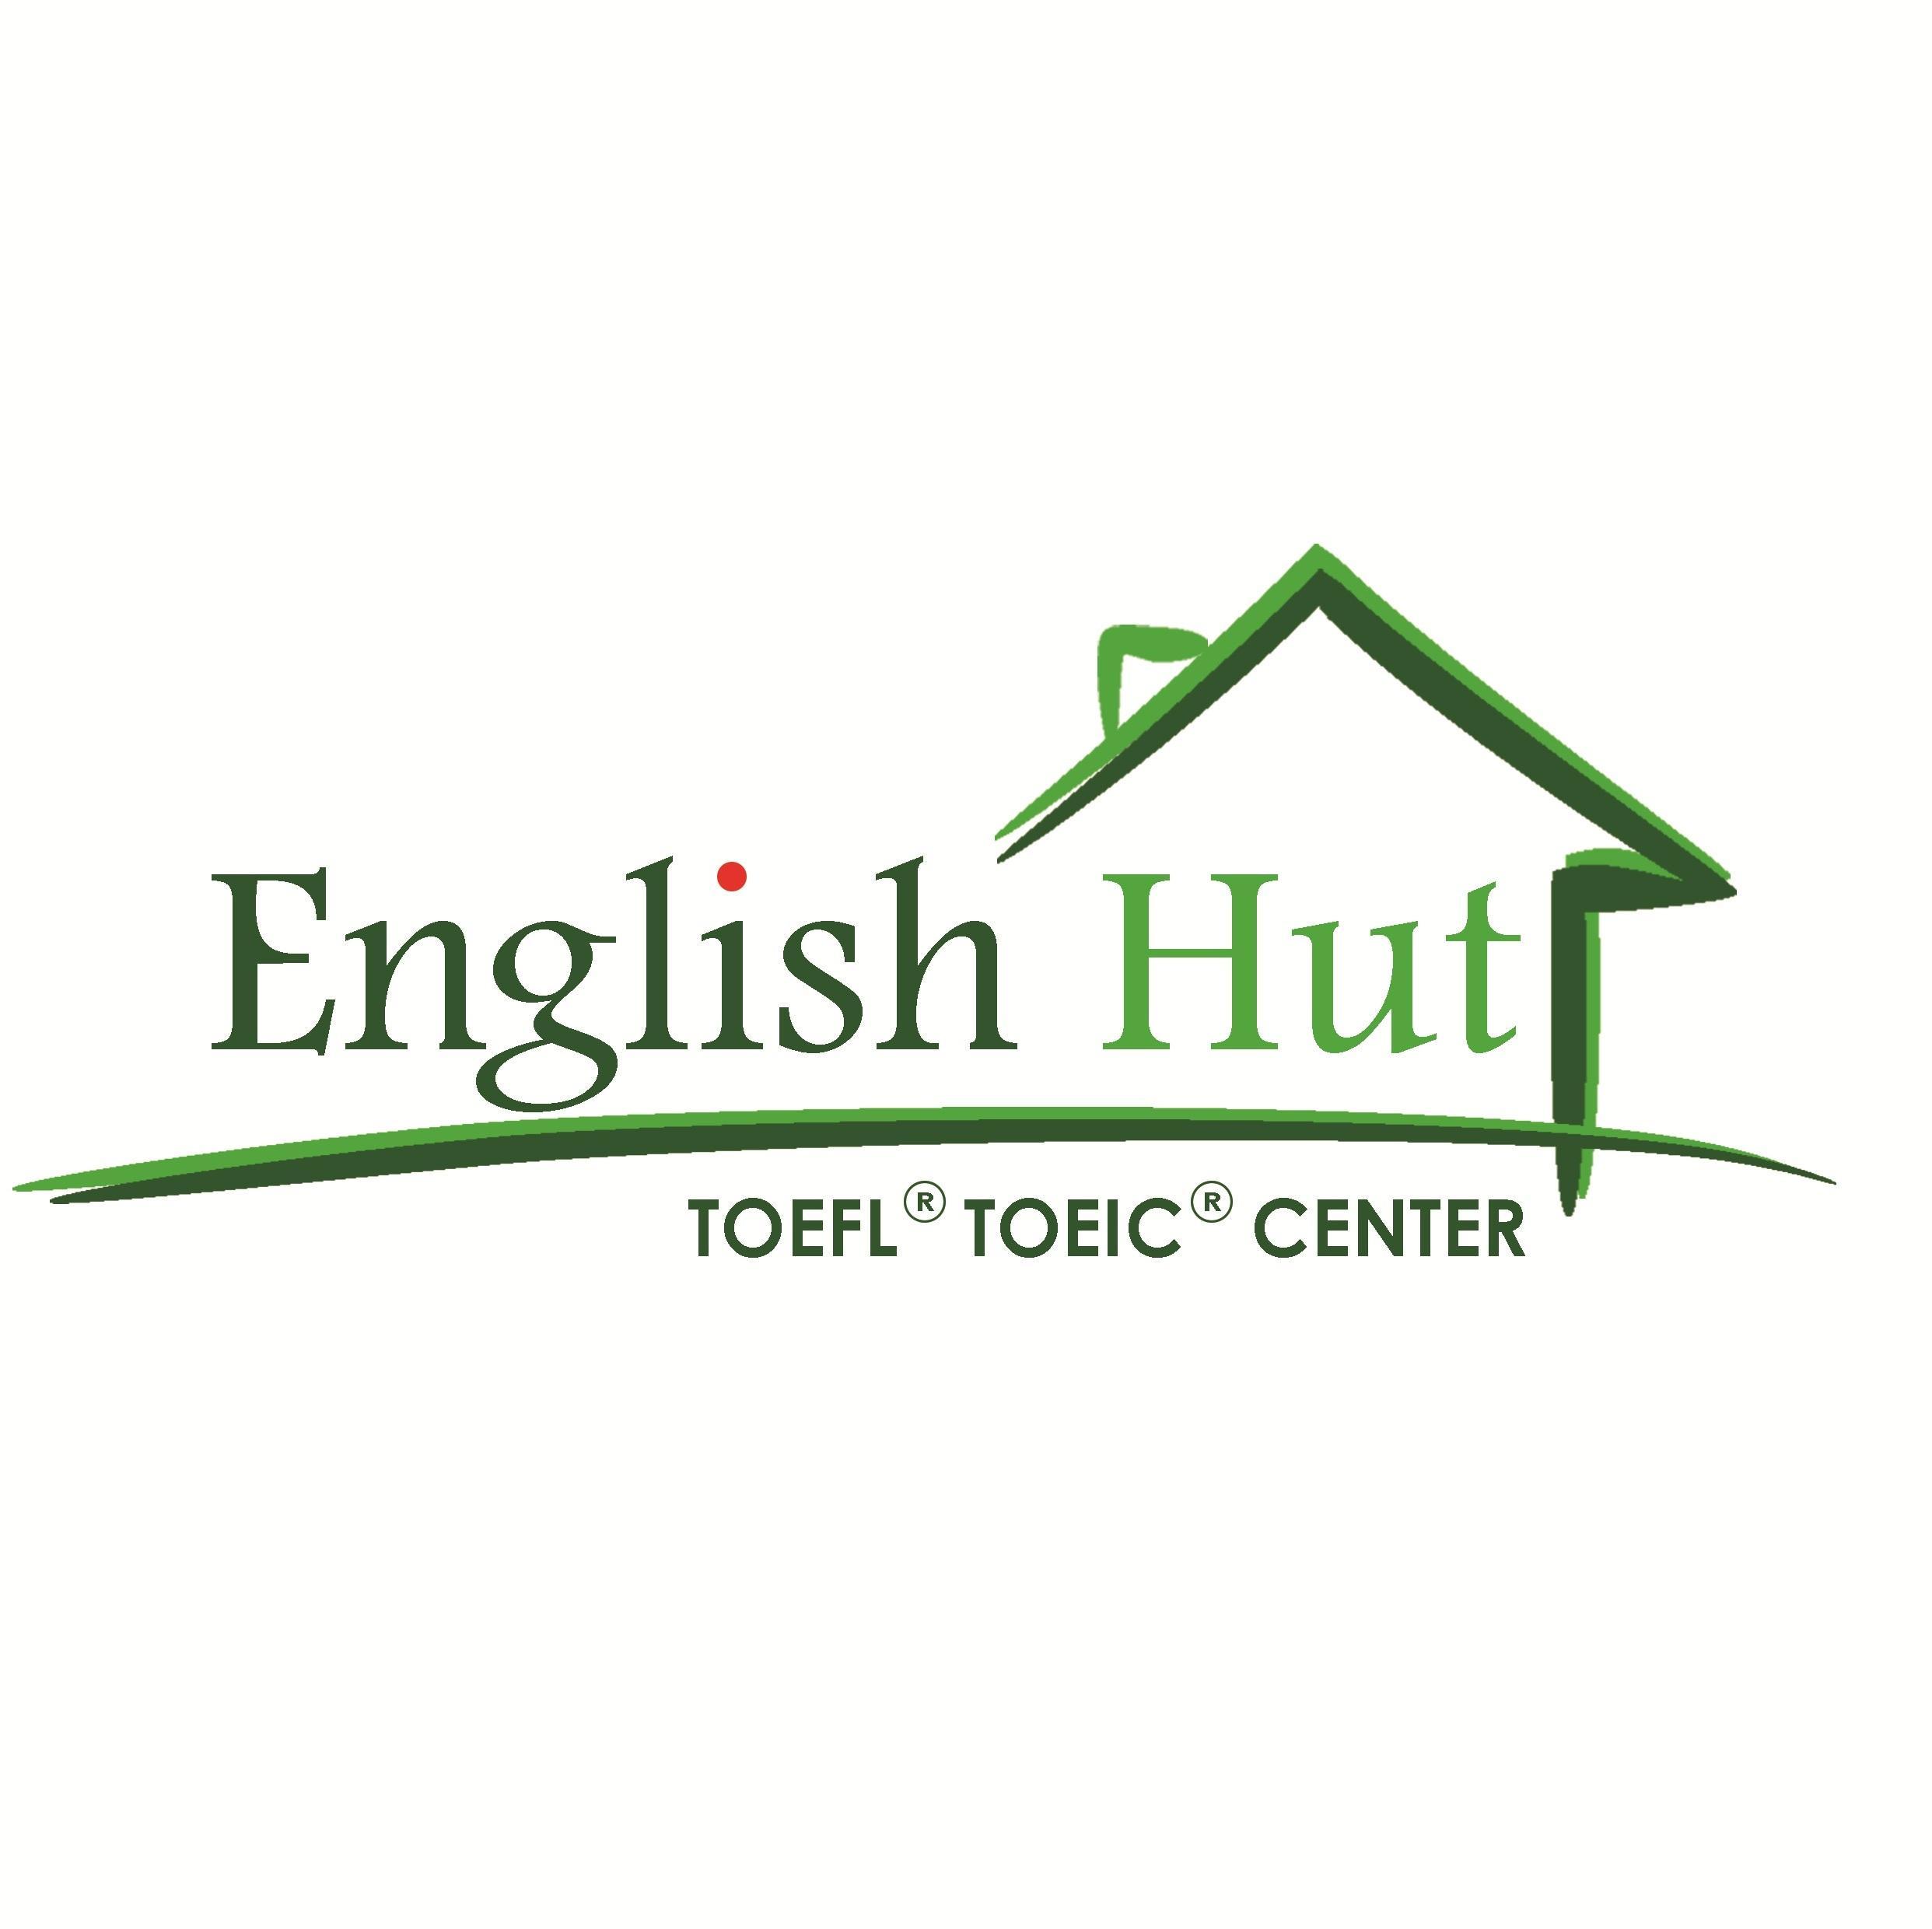 English Hut specializes in TOEFL/TOEIC Preparation for university students. We also offer general English and German courses, as well as conversation class